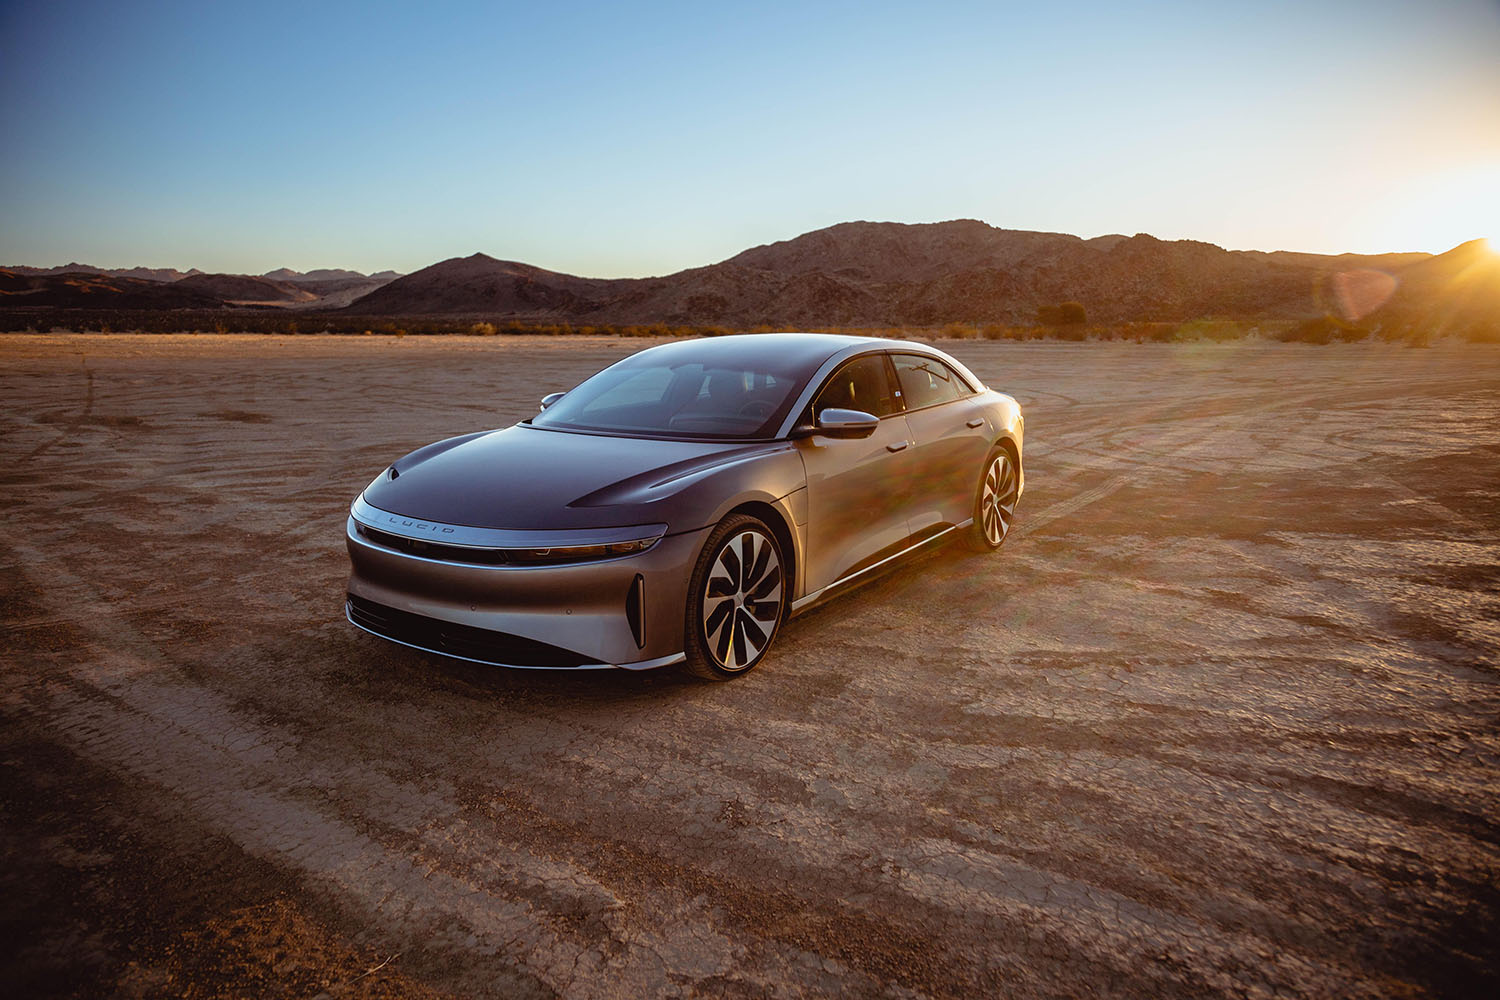 10 Electric Car Companies With the Highest Percentage of Vehicles